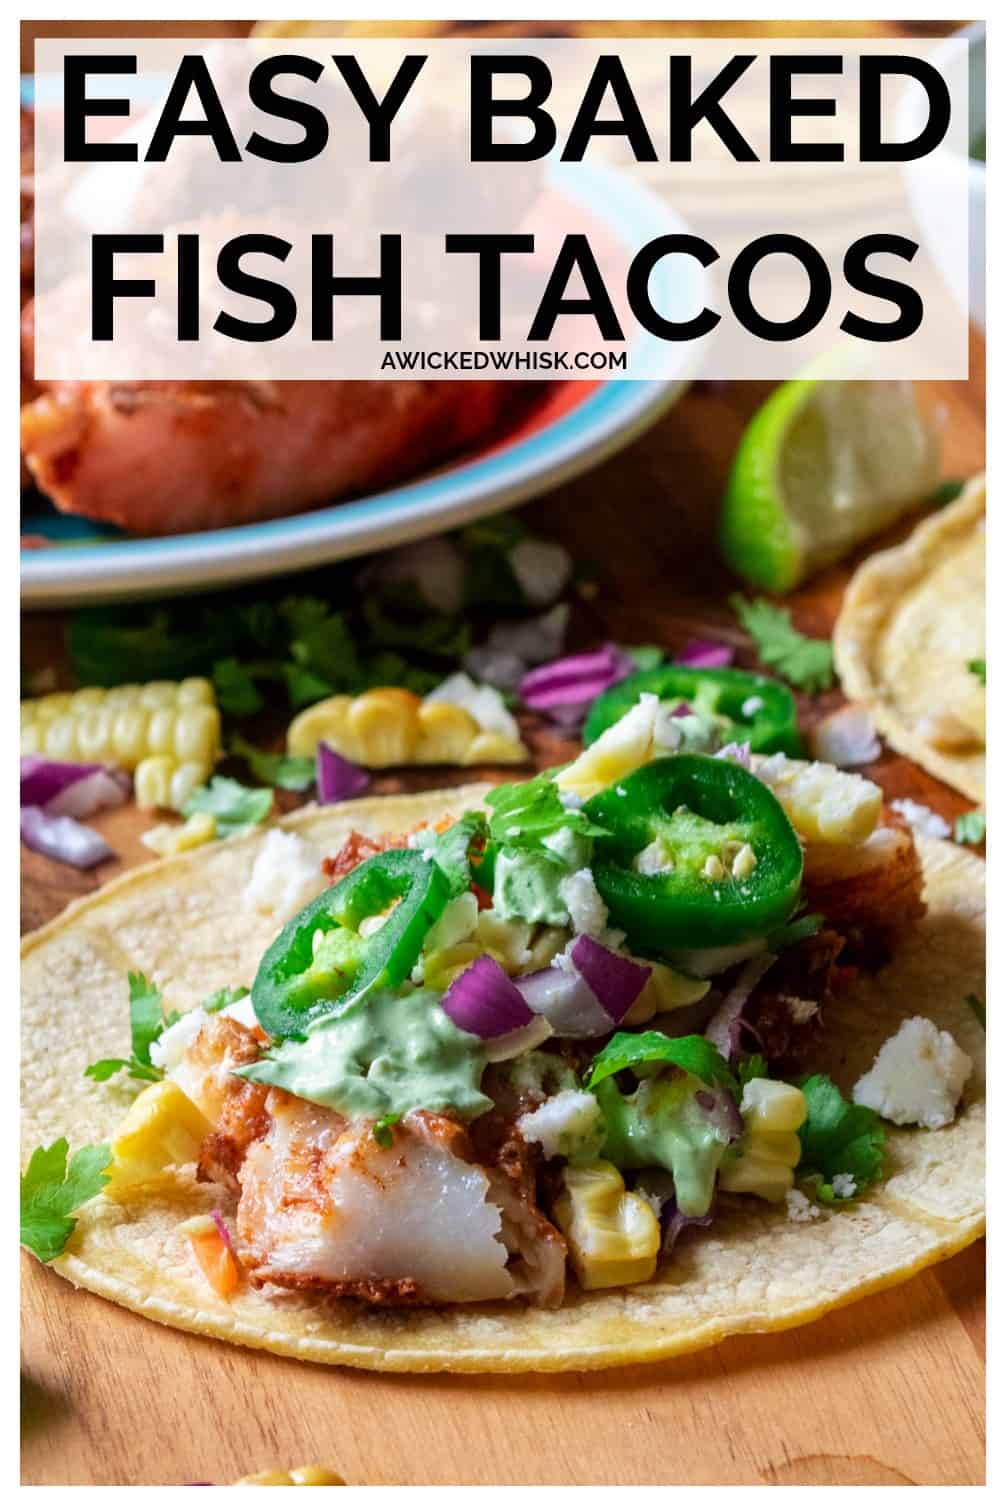 Easy Baked Fish Tacos | A Wicked Whisk